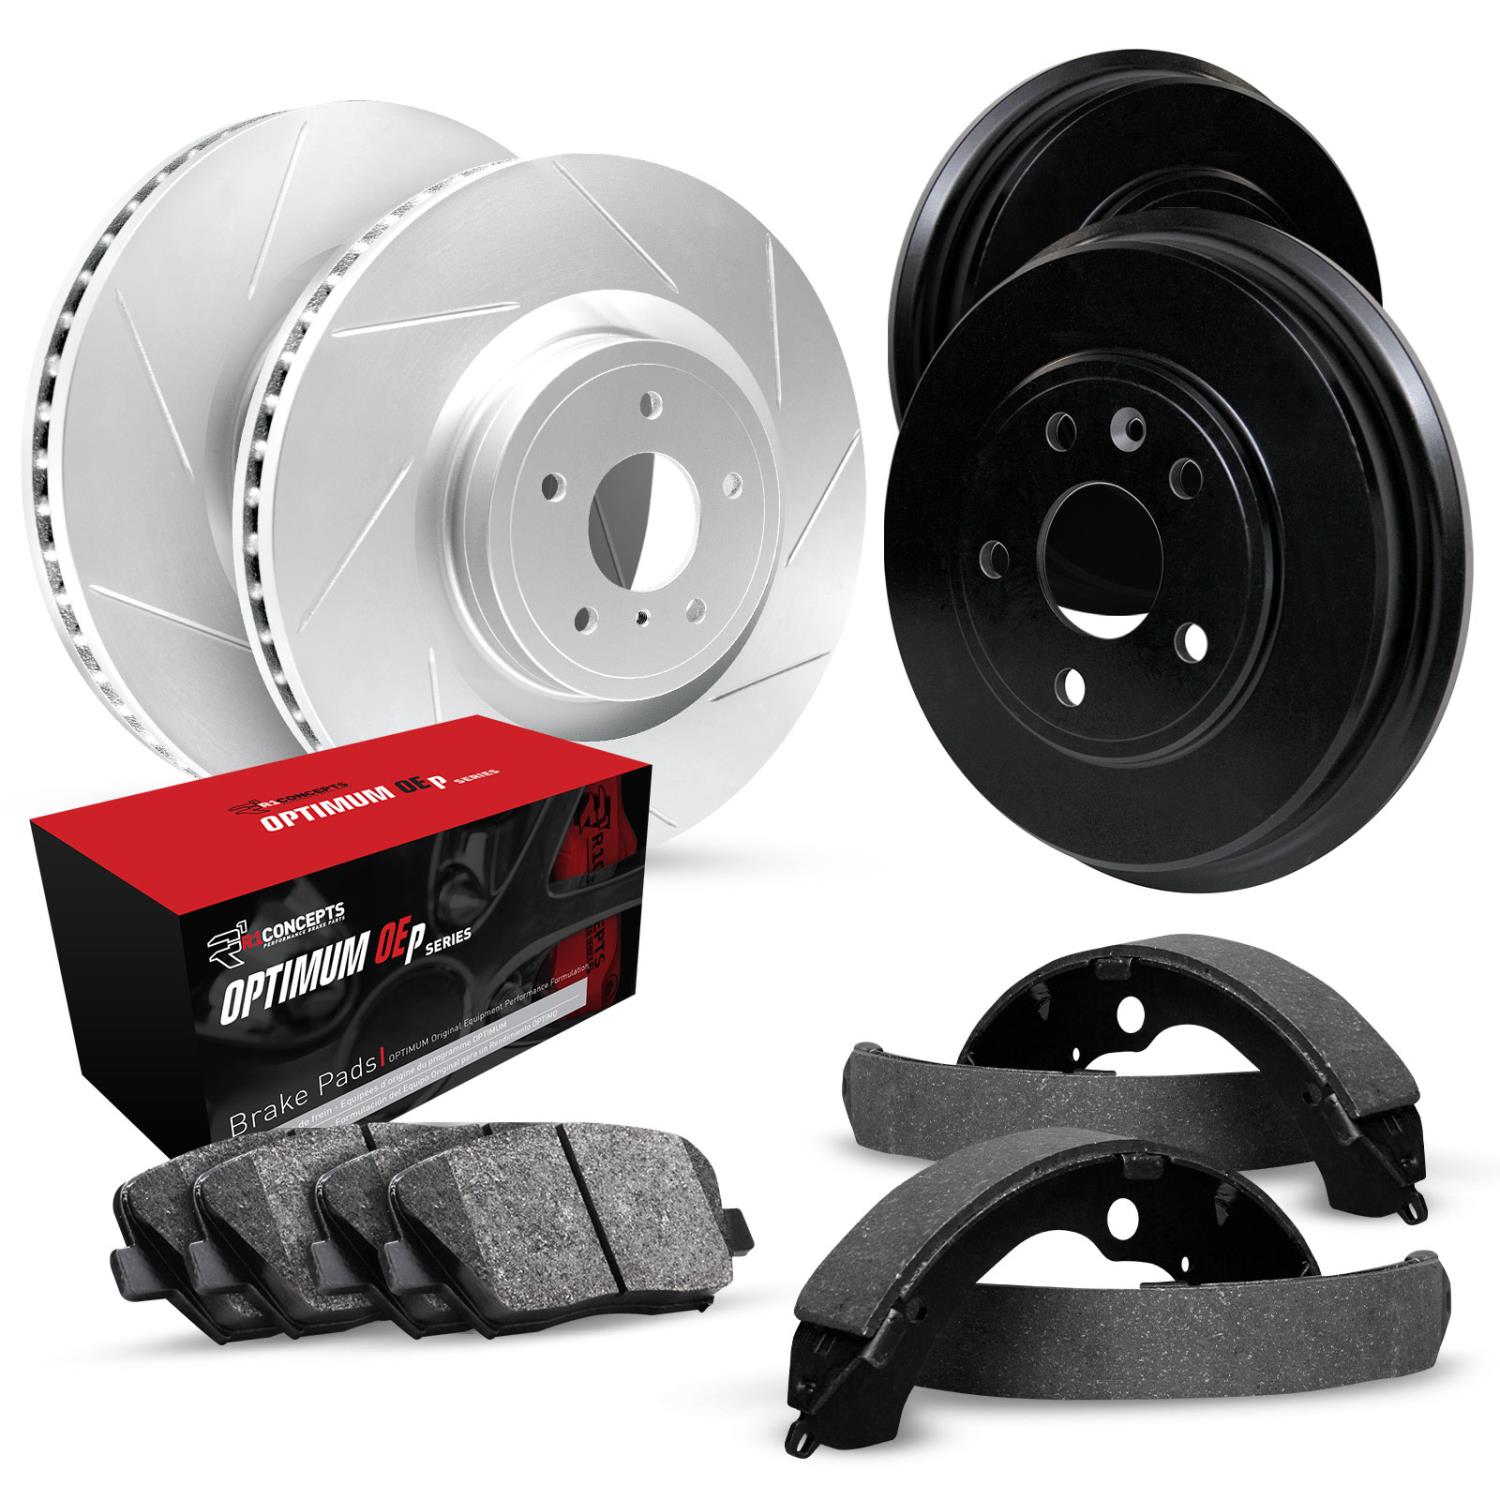 GEO-Carbon Slotted Brake Rotor & Drum Set w/Optimum OE Pads & Shoes, 1994-1996 GM, Position: Front & Rear